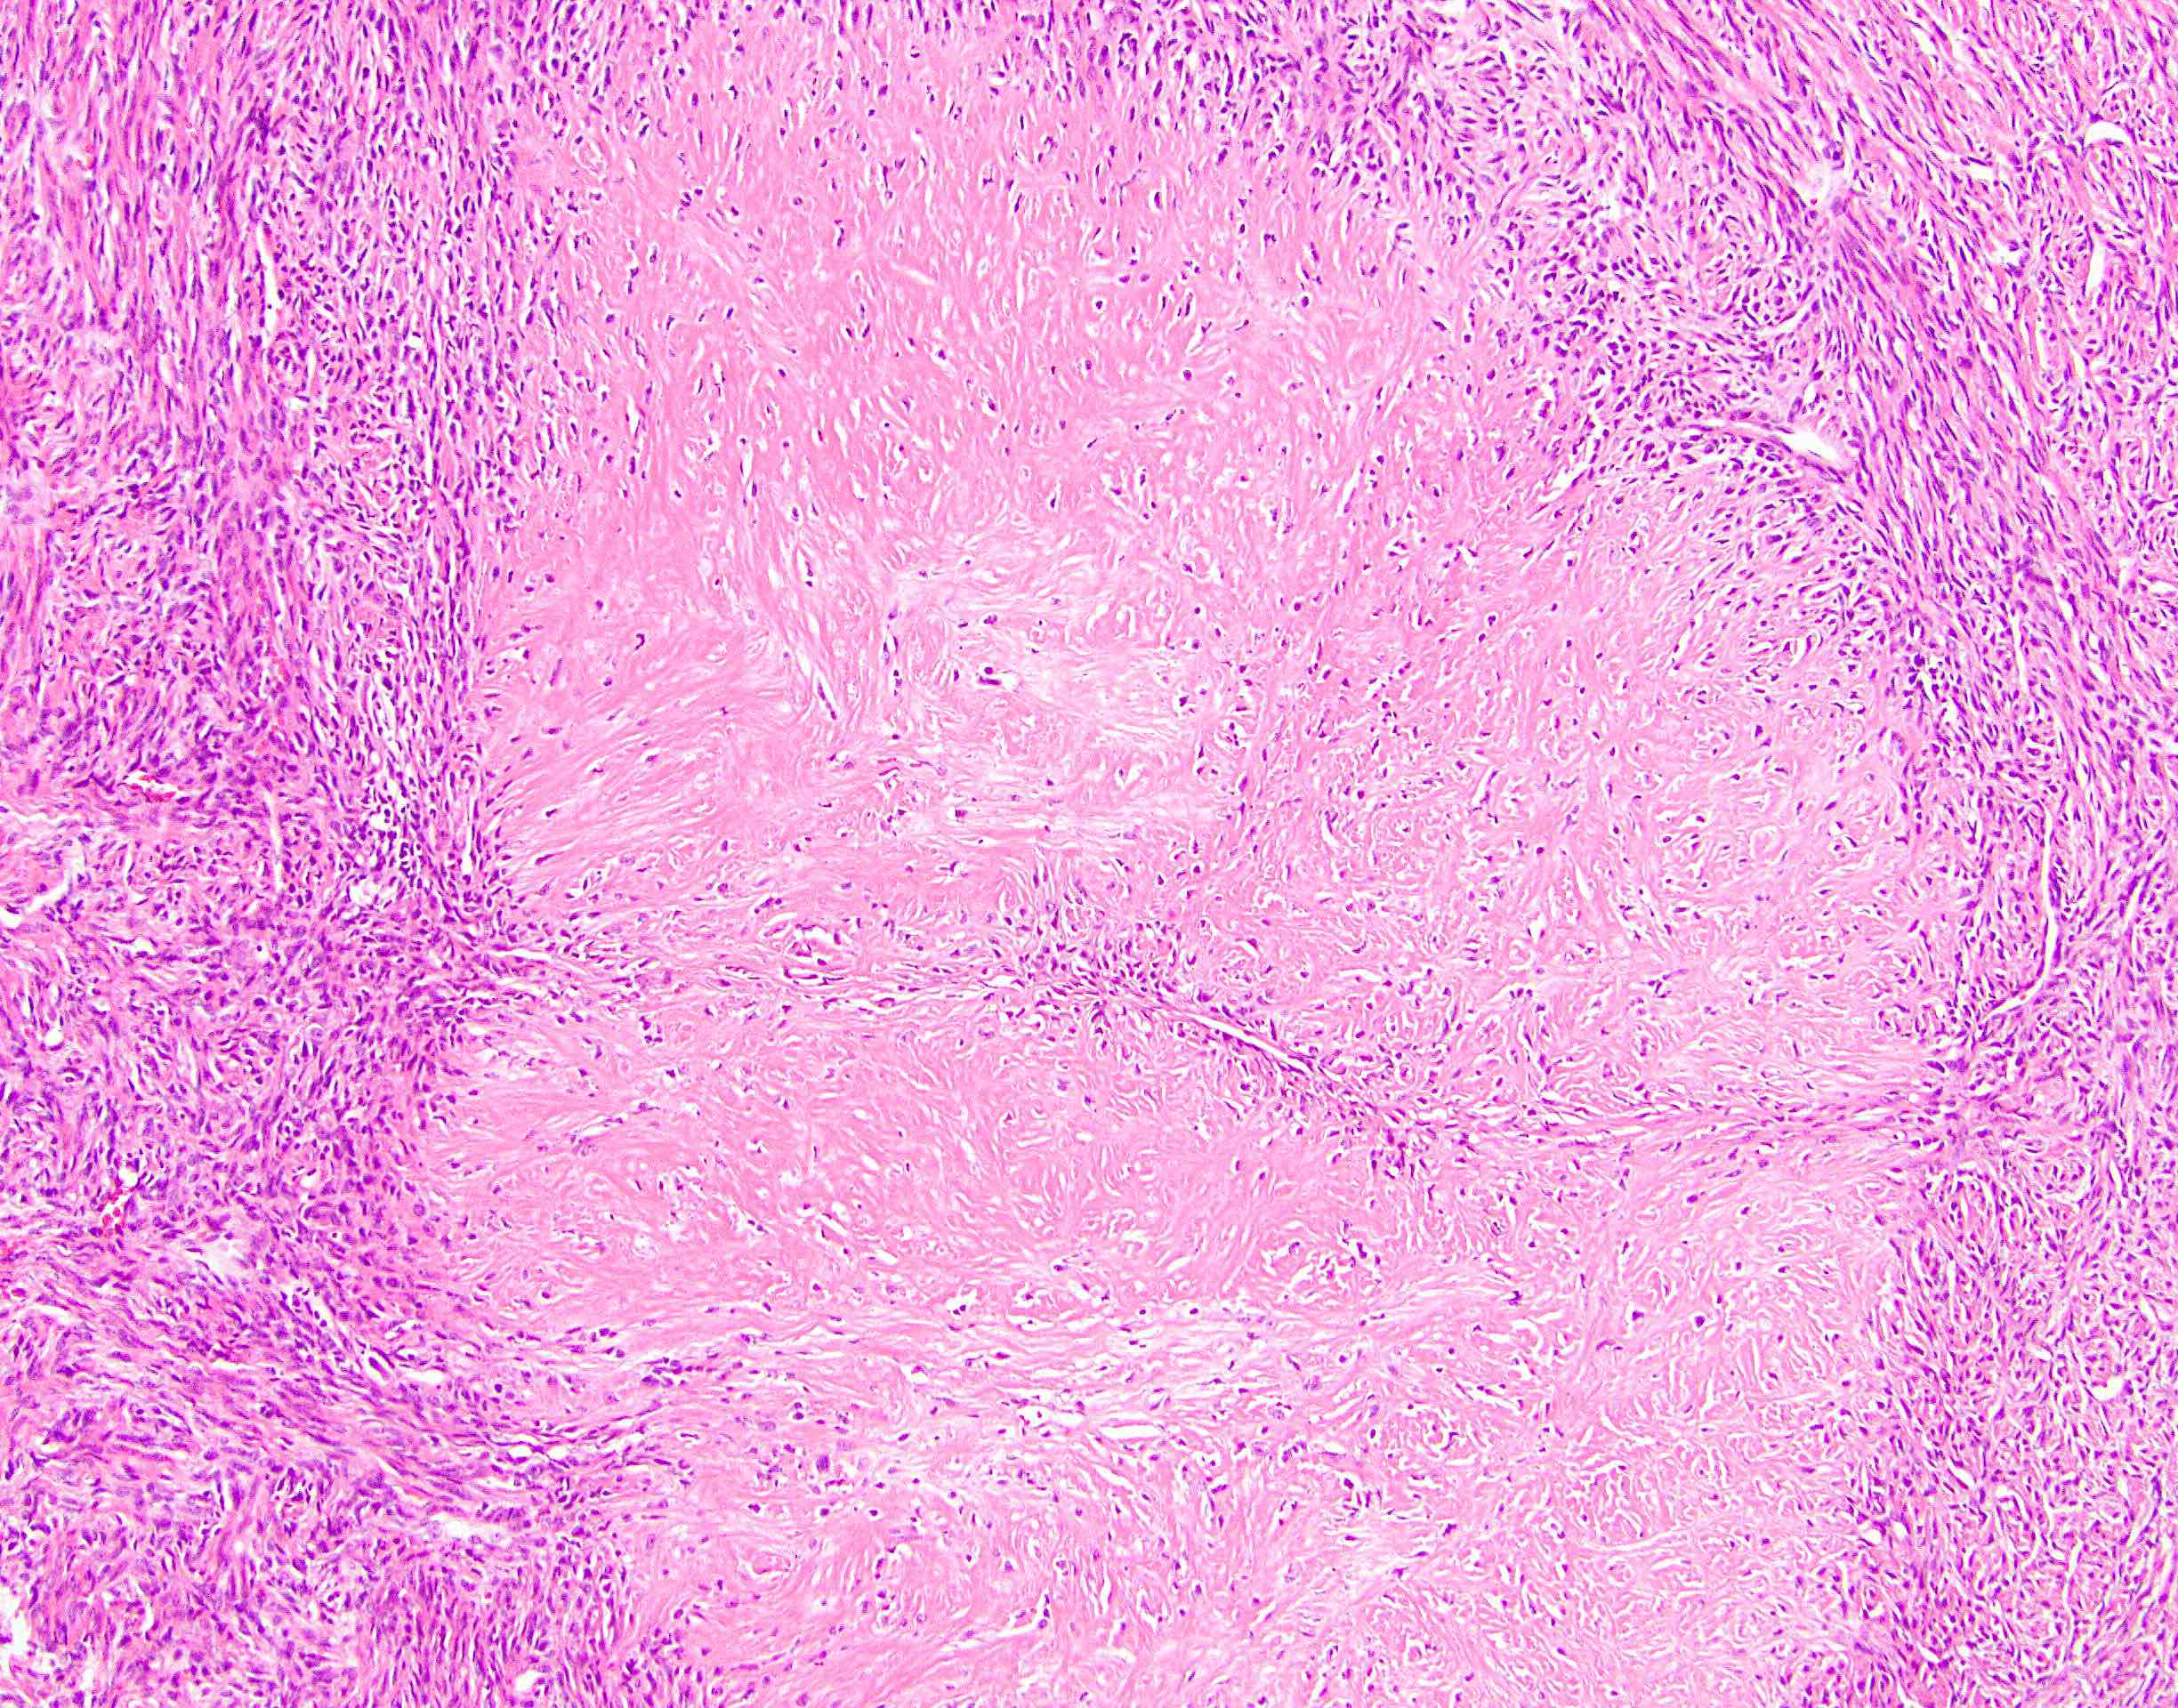 Low grade fibromyxoid sarcoma with giant rosettes